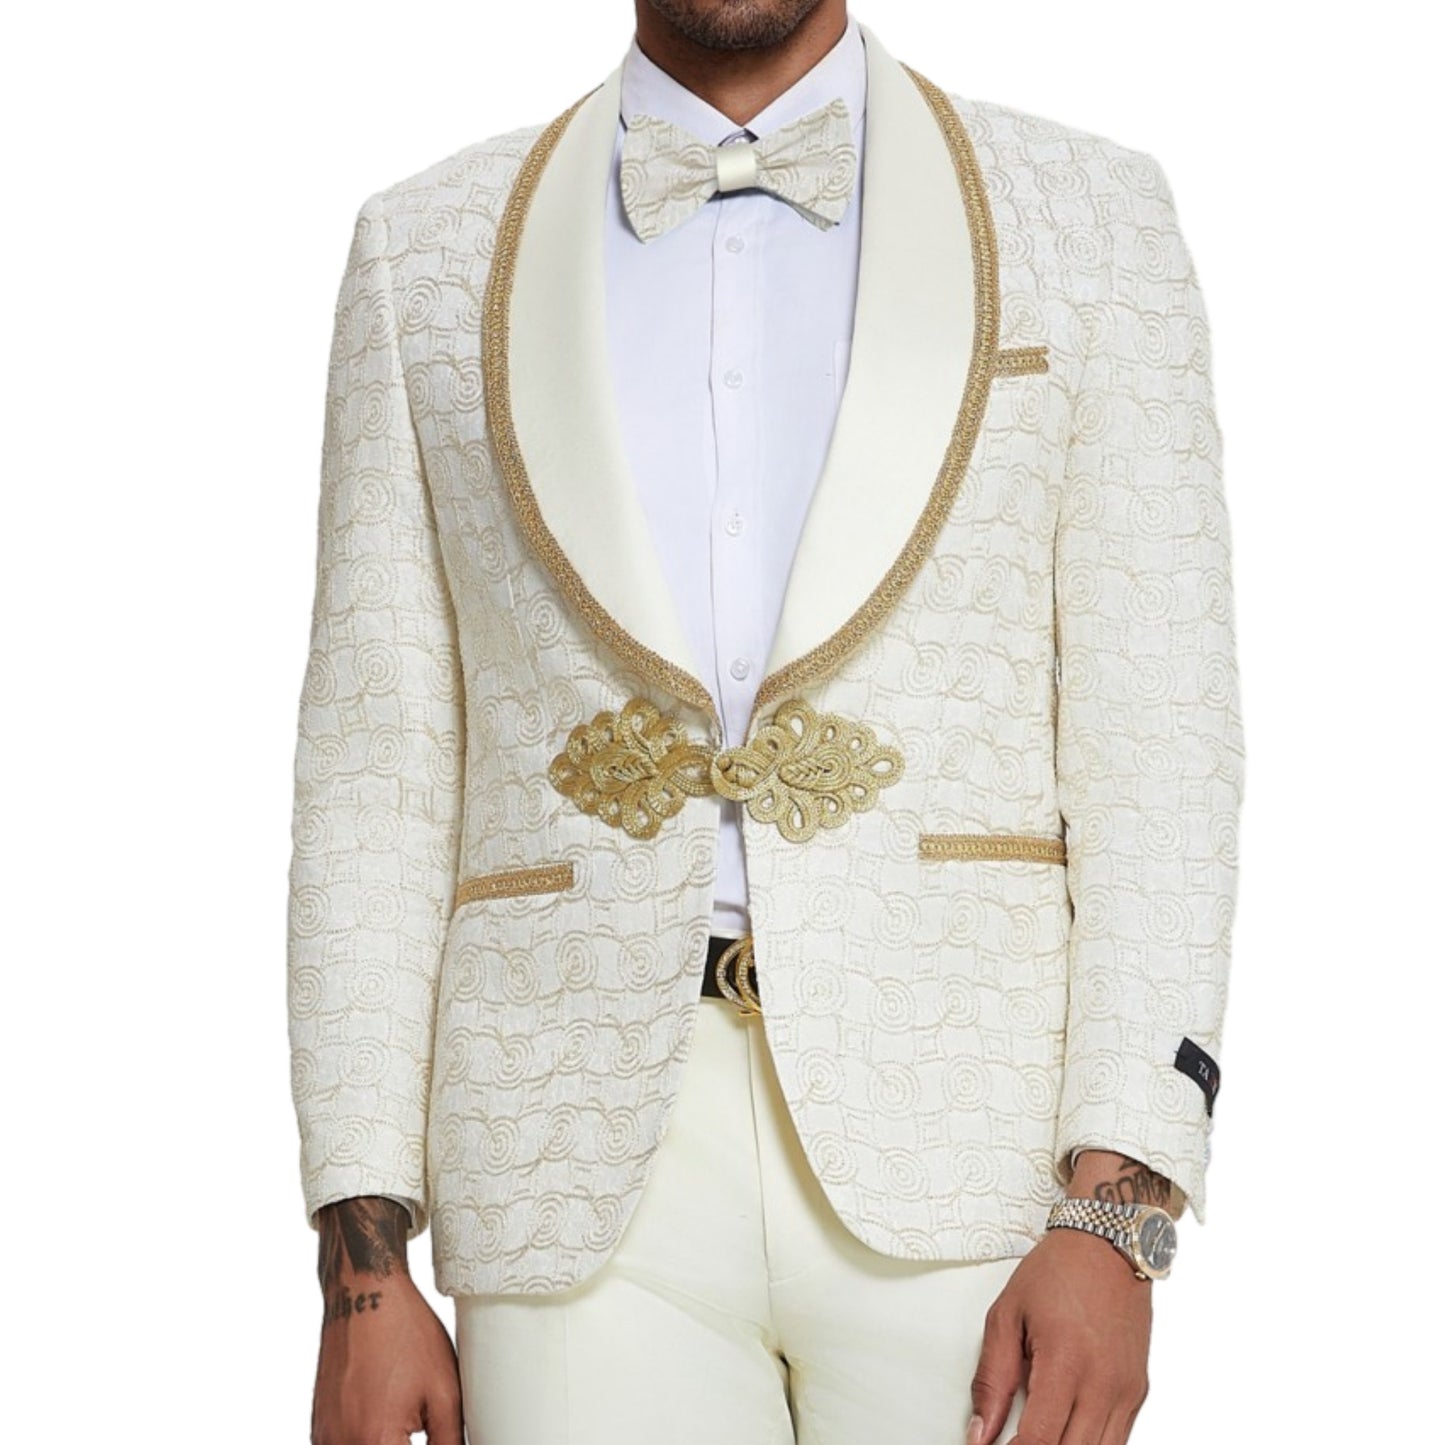 Ivory and Gold Circle Tuxedo Full View, Satin Ivory Pants, Ivory Satin Lapels with Gold Trim, Elegant Gold Buttons, Slim Fit Men's Suit, Matching Ivory and Gold Circle Bowtie.